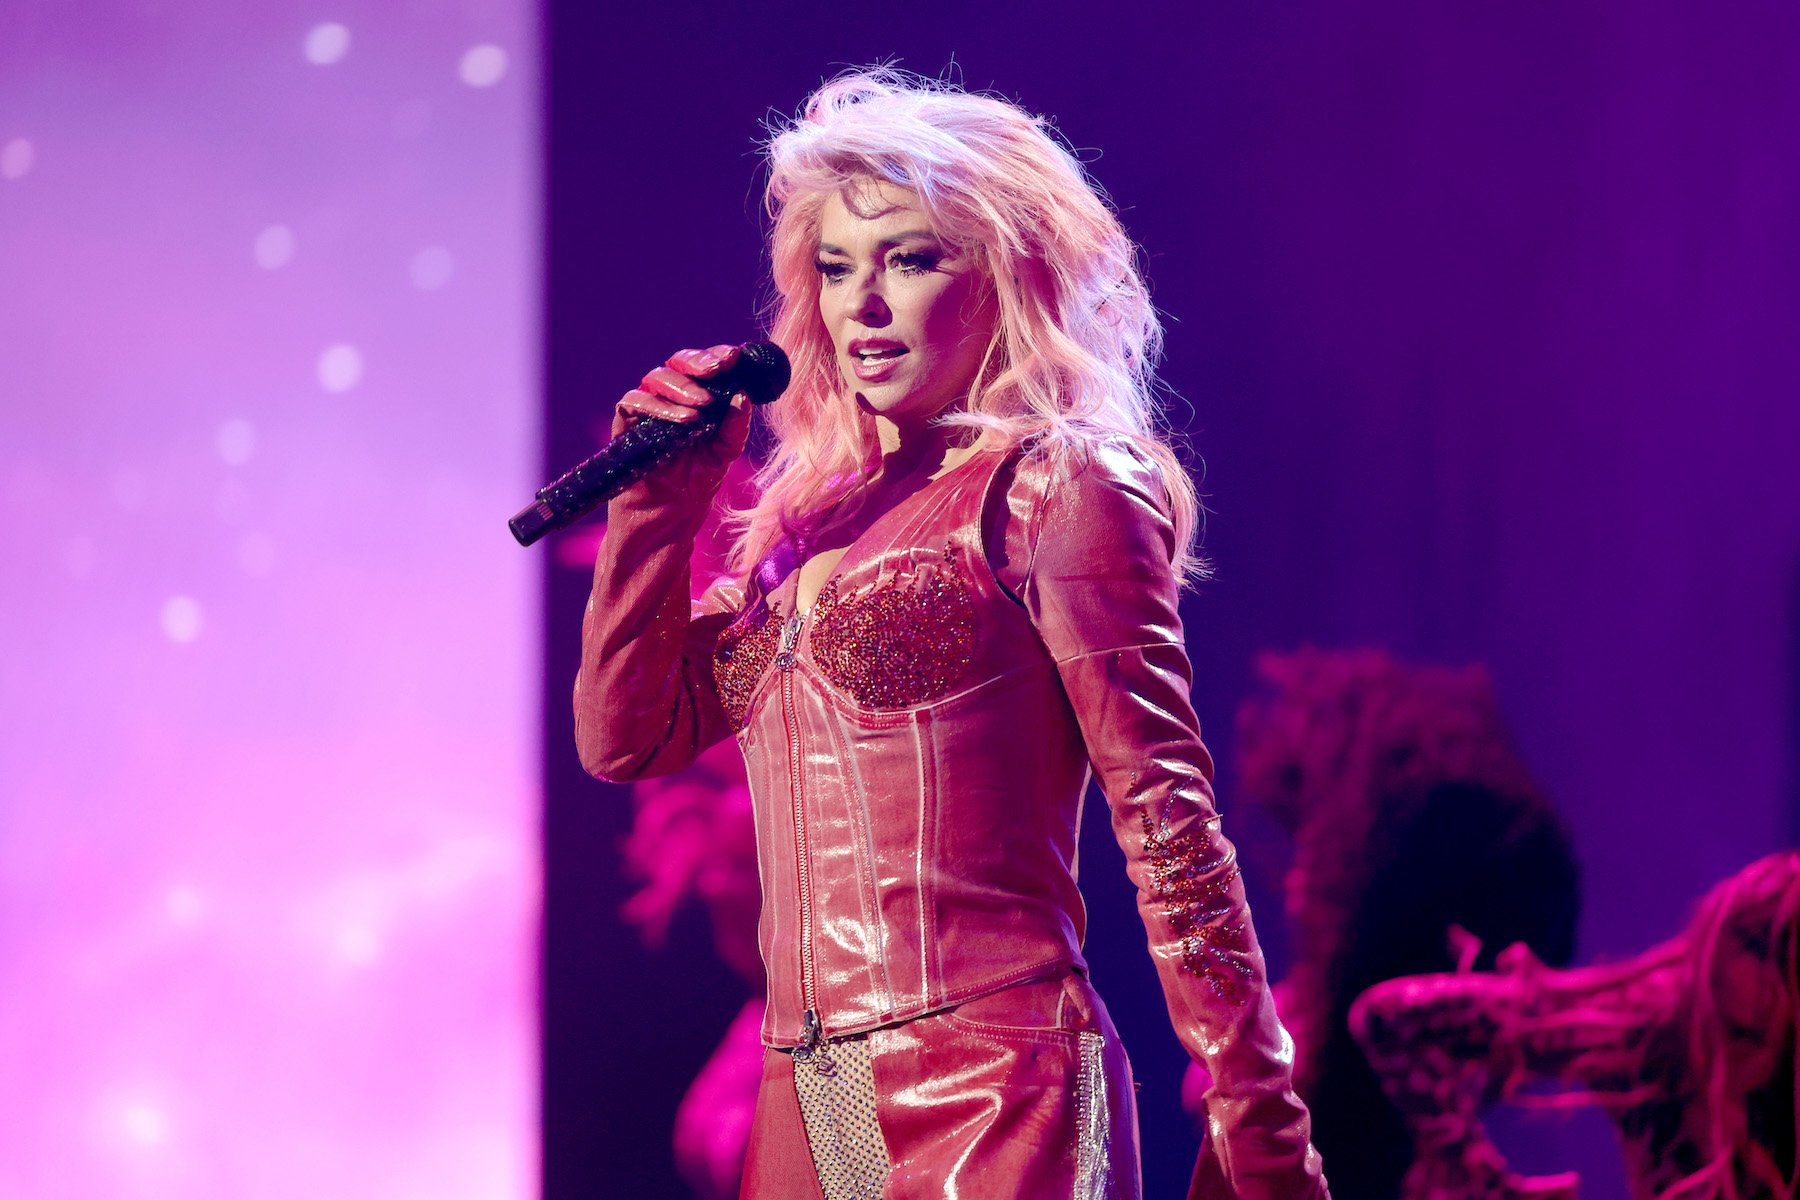 Shania Twain, who gave one of the best moments at the 2022 People's Choice Awards with her performance, wearing pink hair and a pink outfit